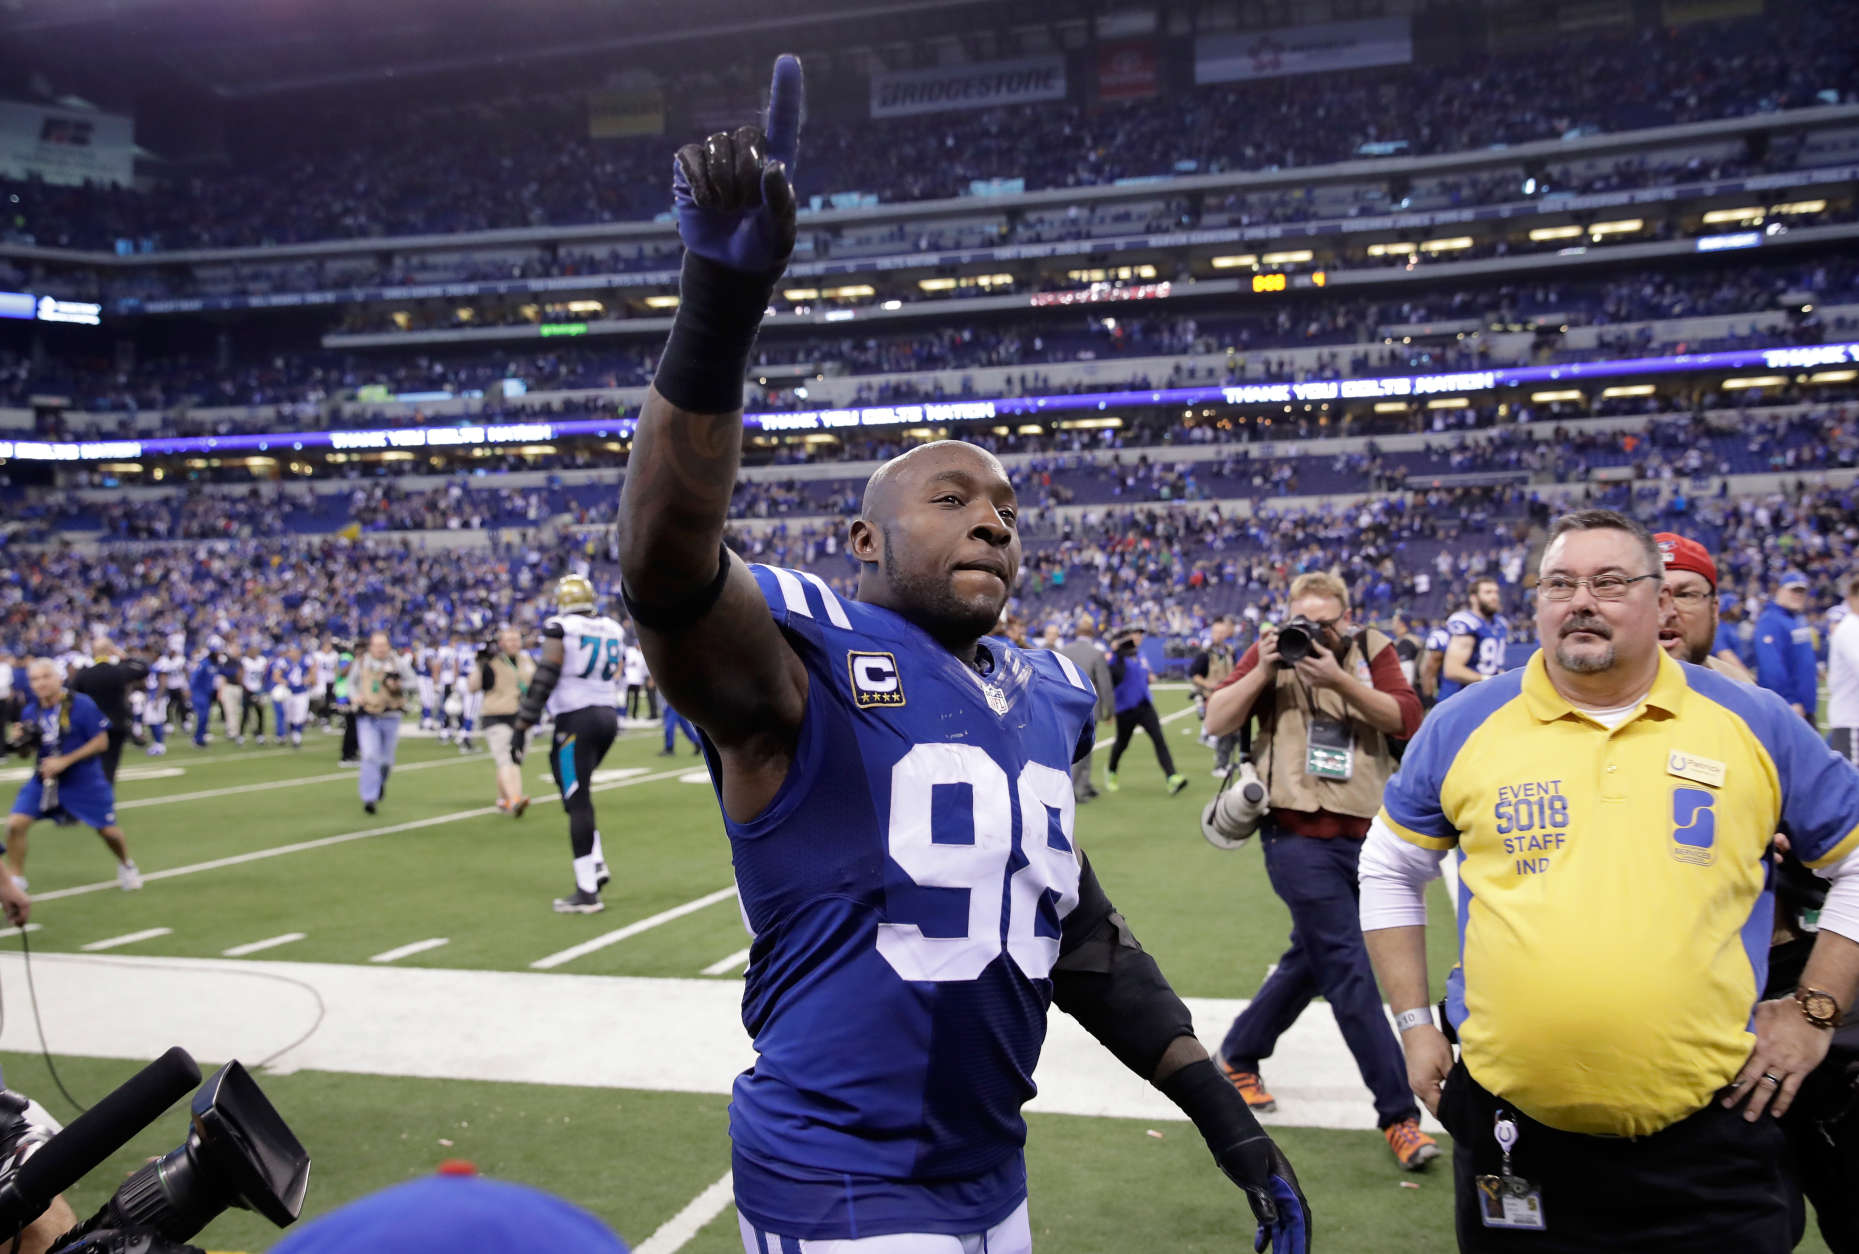 INDIANAPOLIS, IN - JANUARY 01:  Robert Mathis #98 of the Indianapolis Colts waves to the crowd after the game against the Jacksonville Jaguars at Lucas Oil Stadium on January 1, 2017 in Indianapolis, Indiana.  (Photo by Andy Lyons/Getty Images)